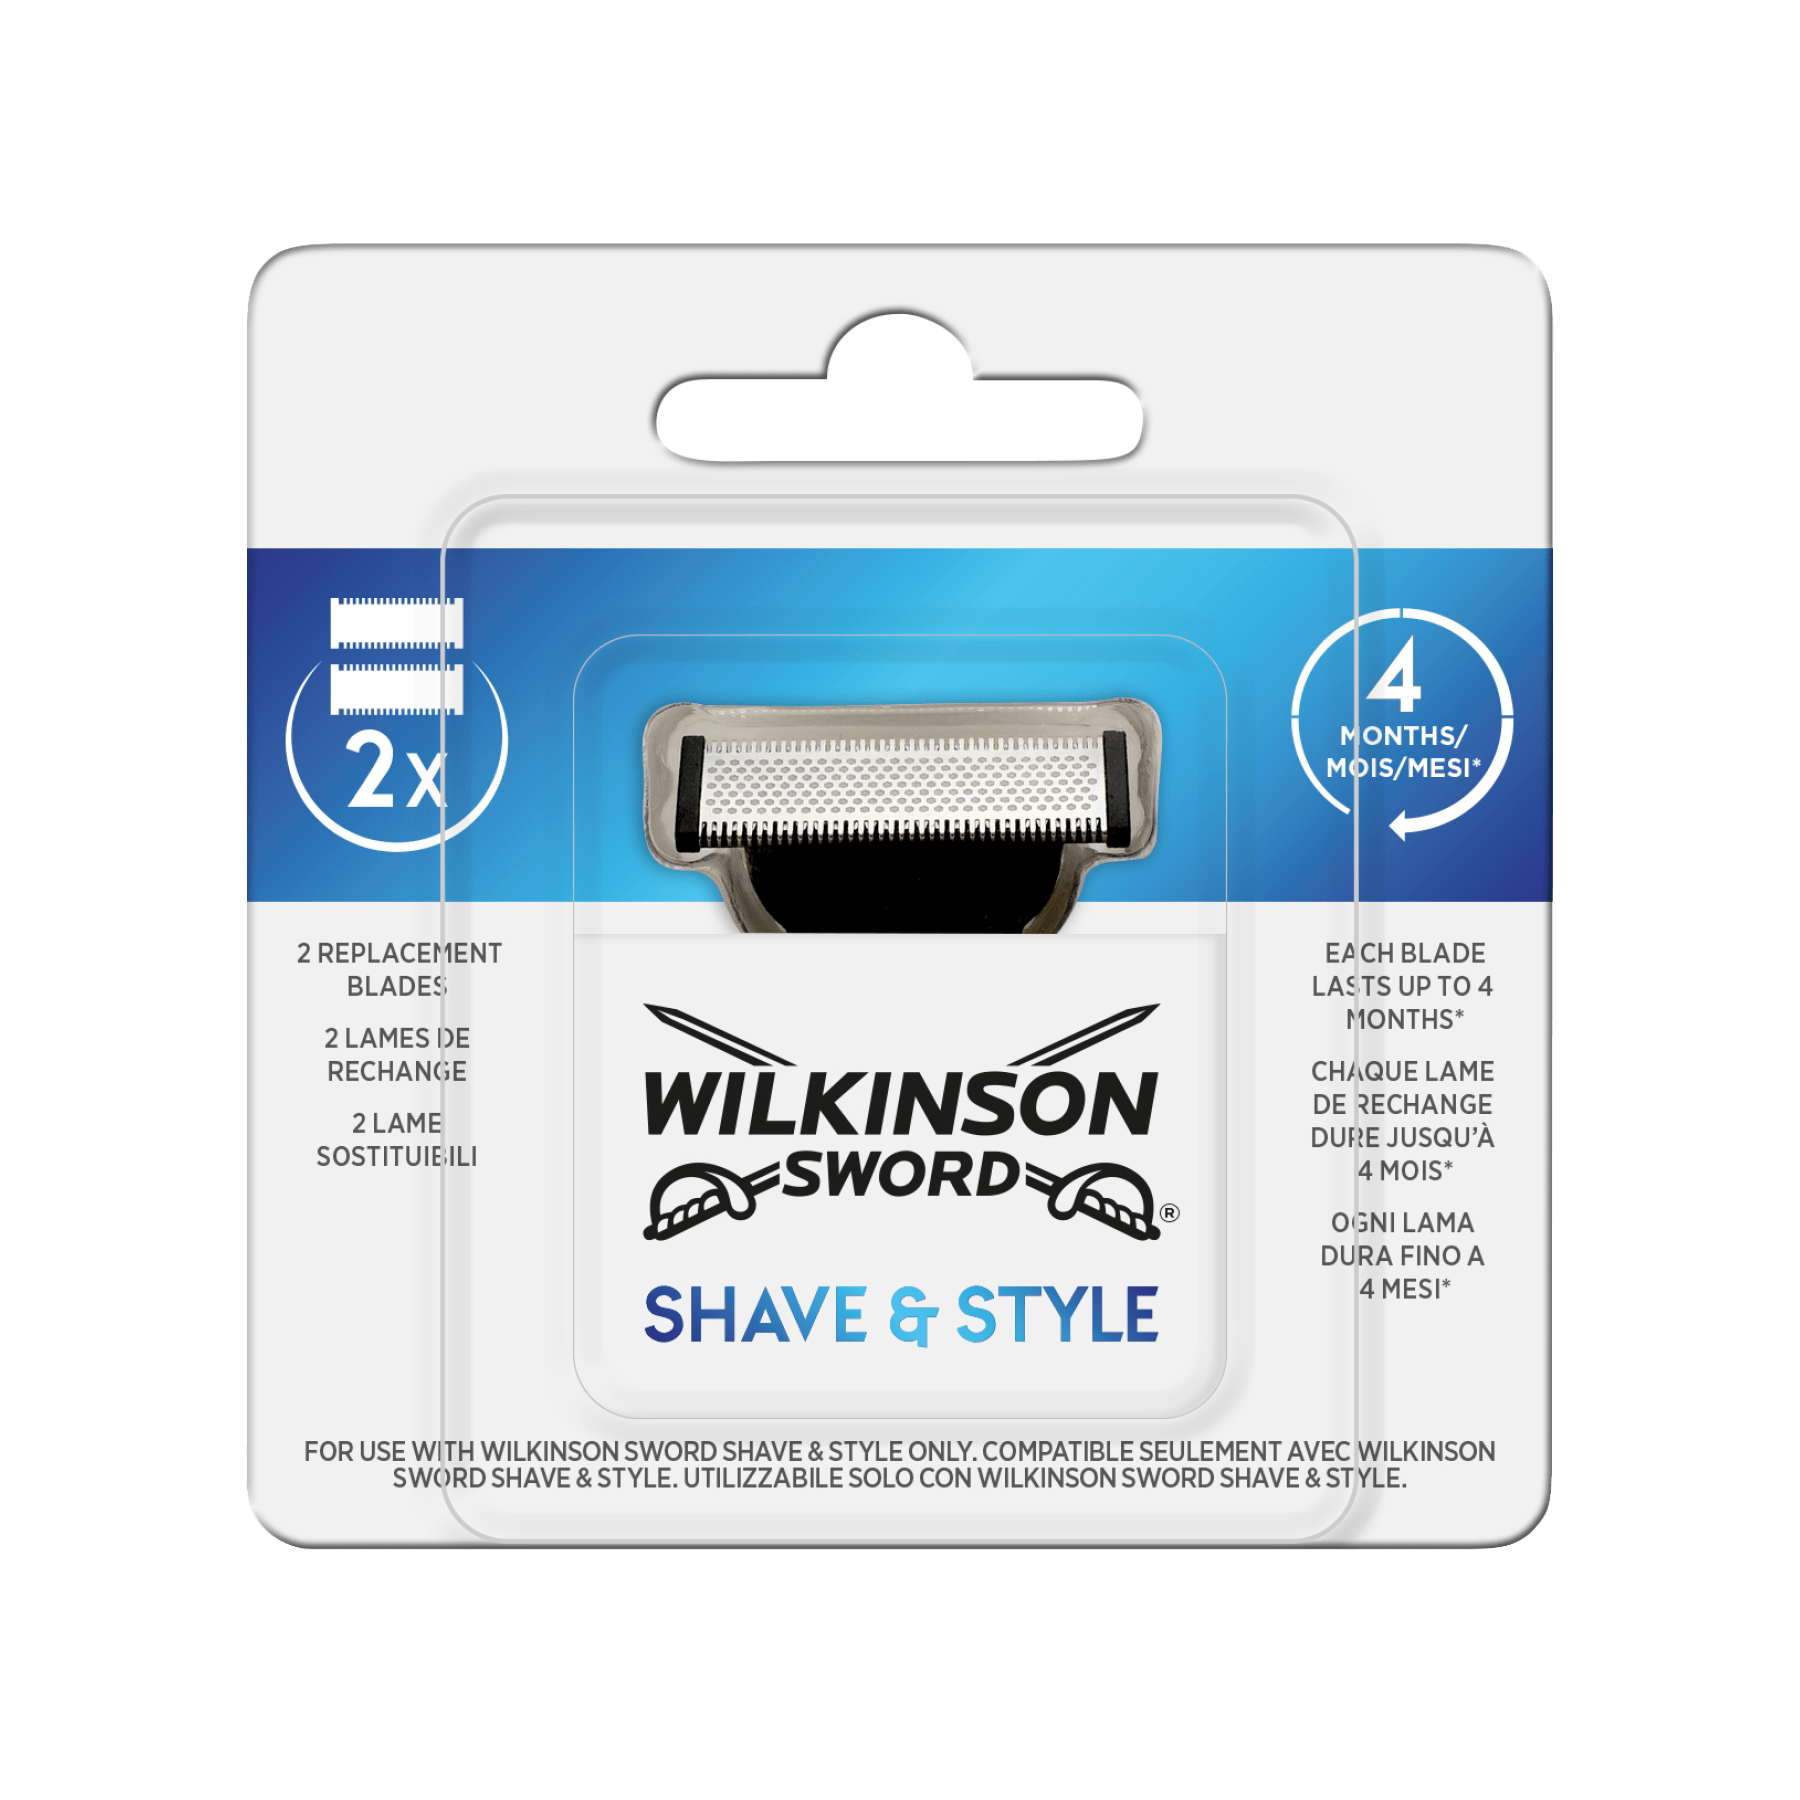 Shave & Style Blades